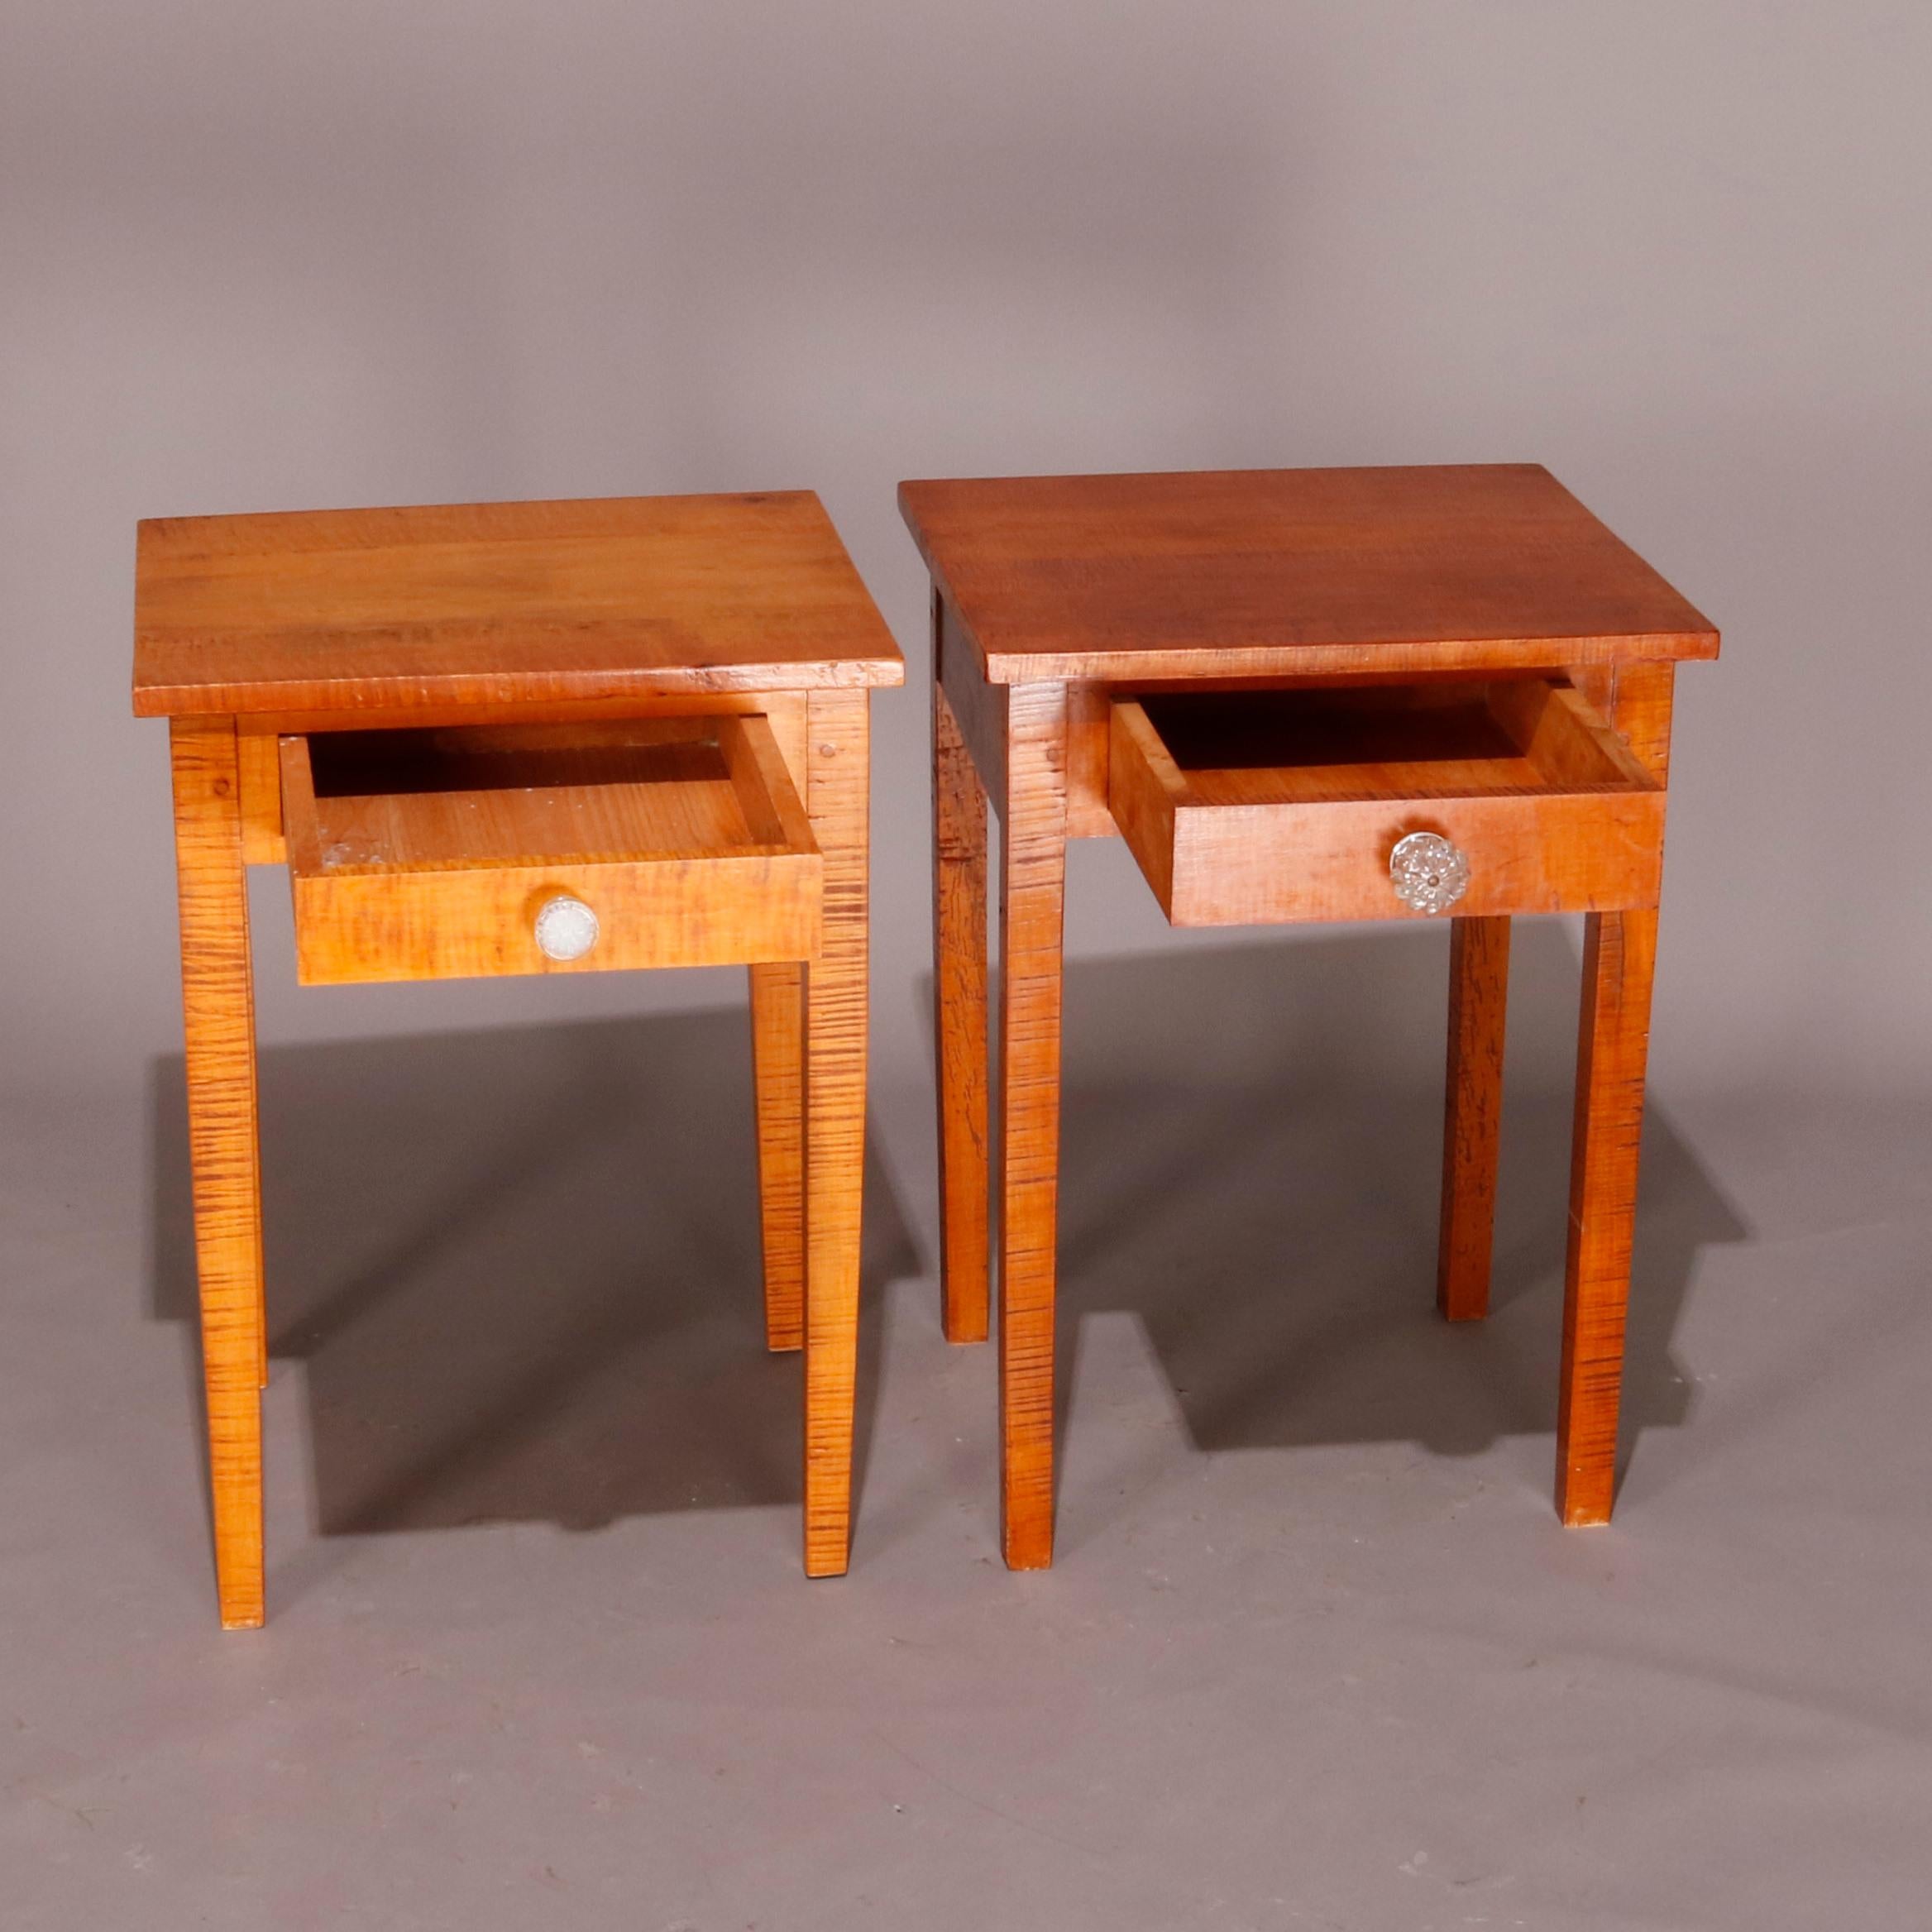 A pair of Hepplewhite style end stands offer tiger maple construction with case having single drawer and raised on square and tapered legs, 20th century.

Measures: 29